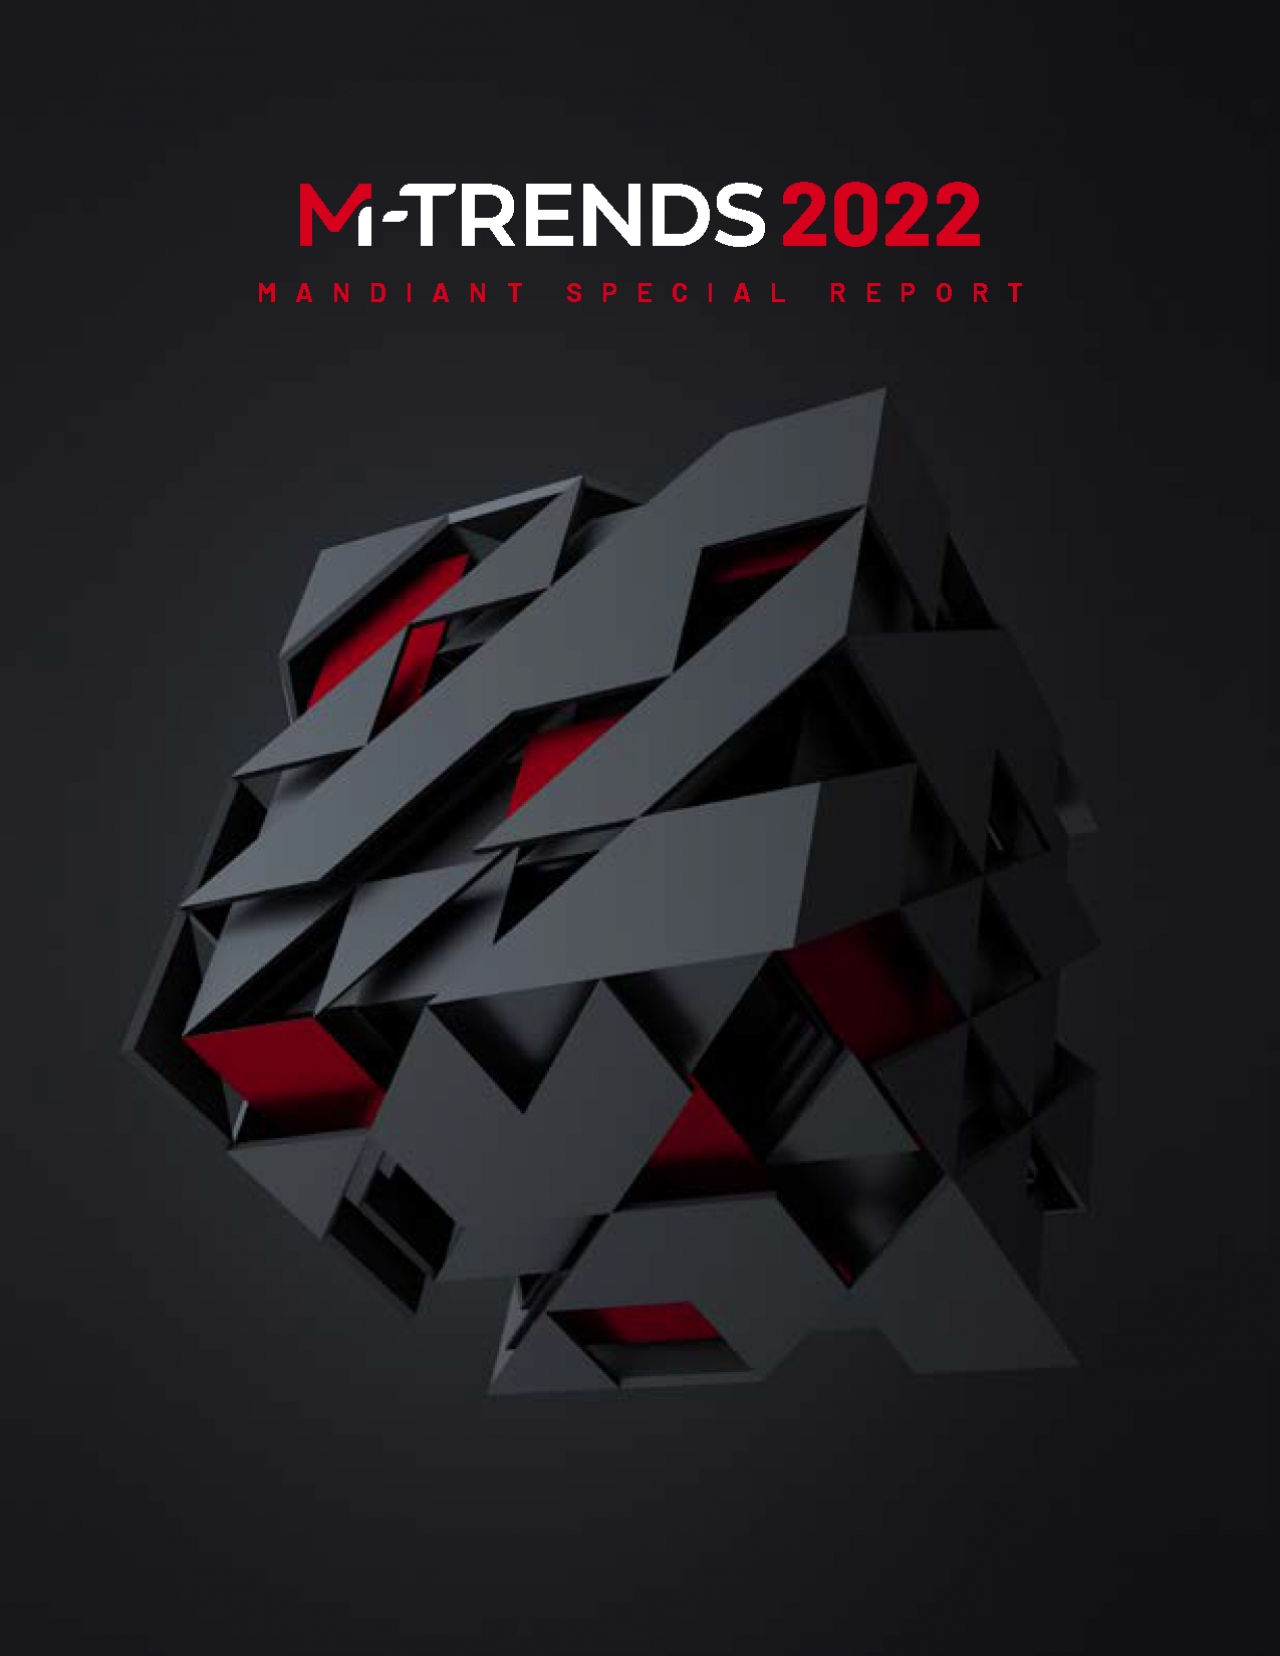 iTWire Mandiant MTrends 2022 Report provides inside look at the